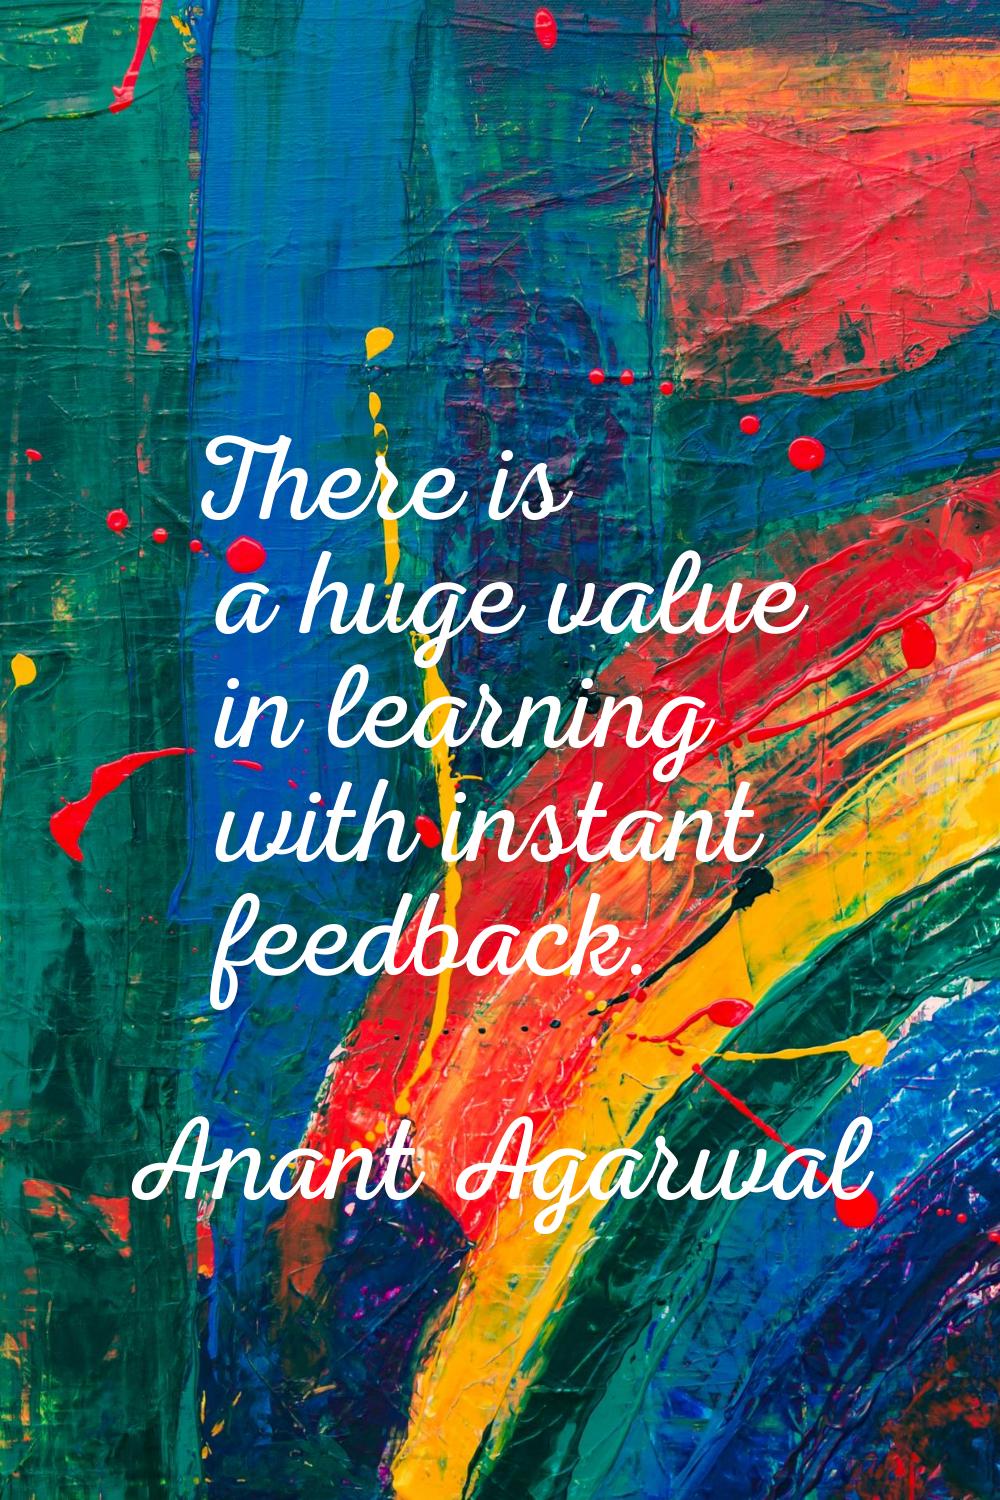 There is a huge value in learning with instant feedback.